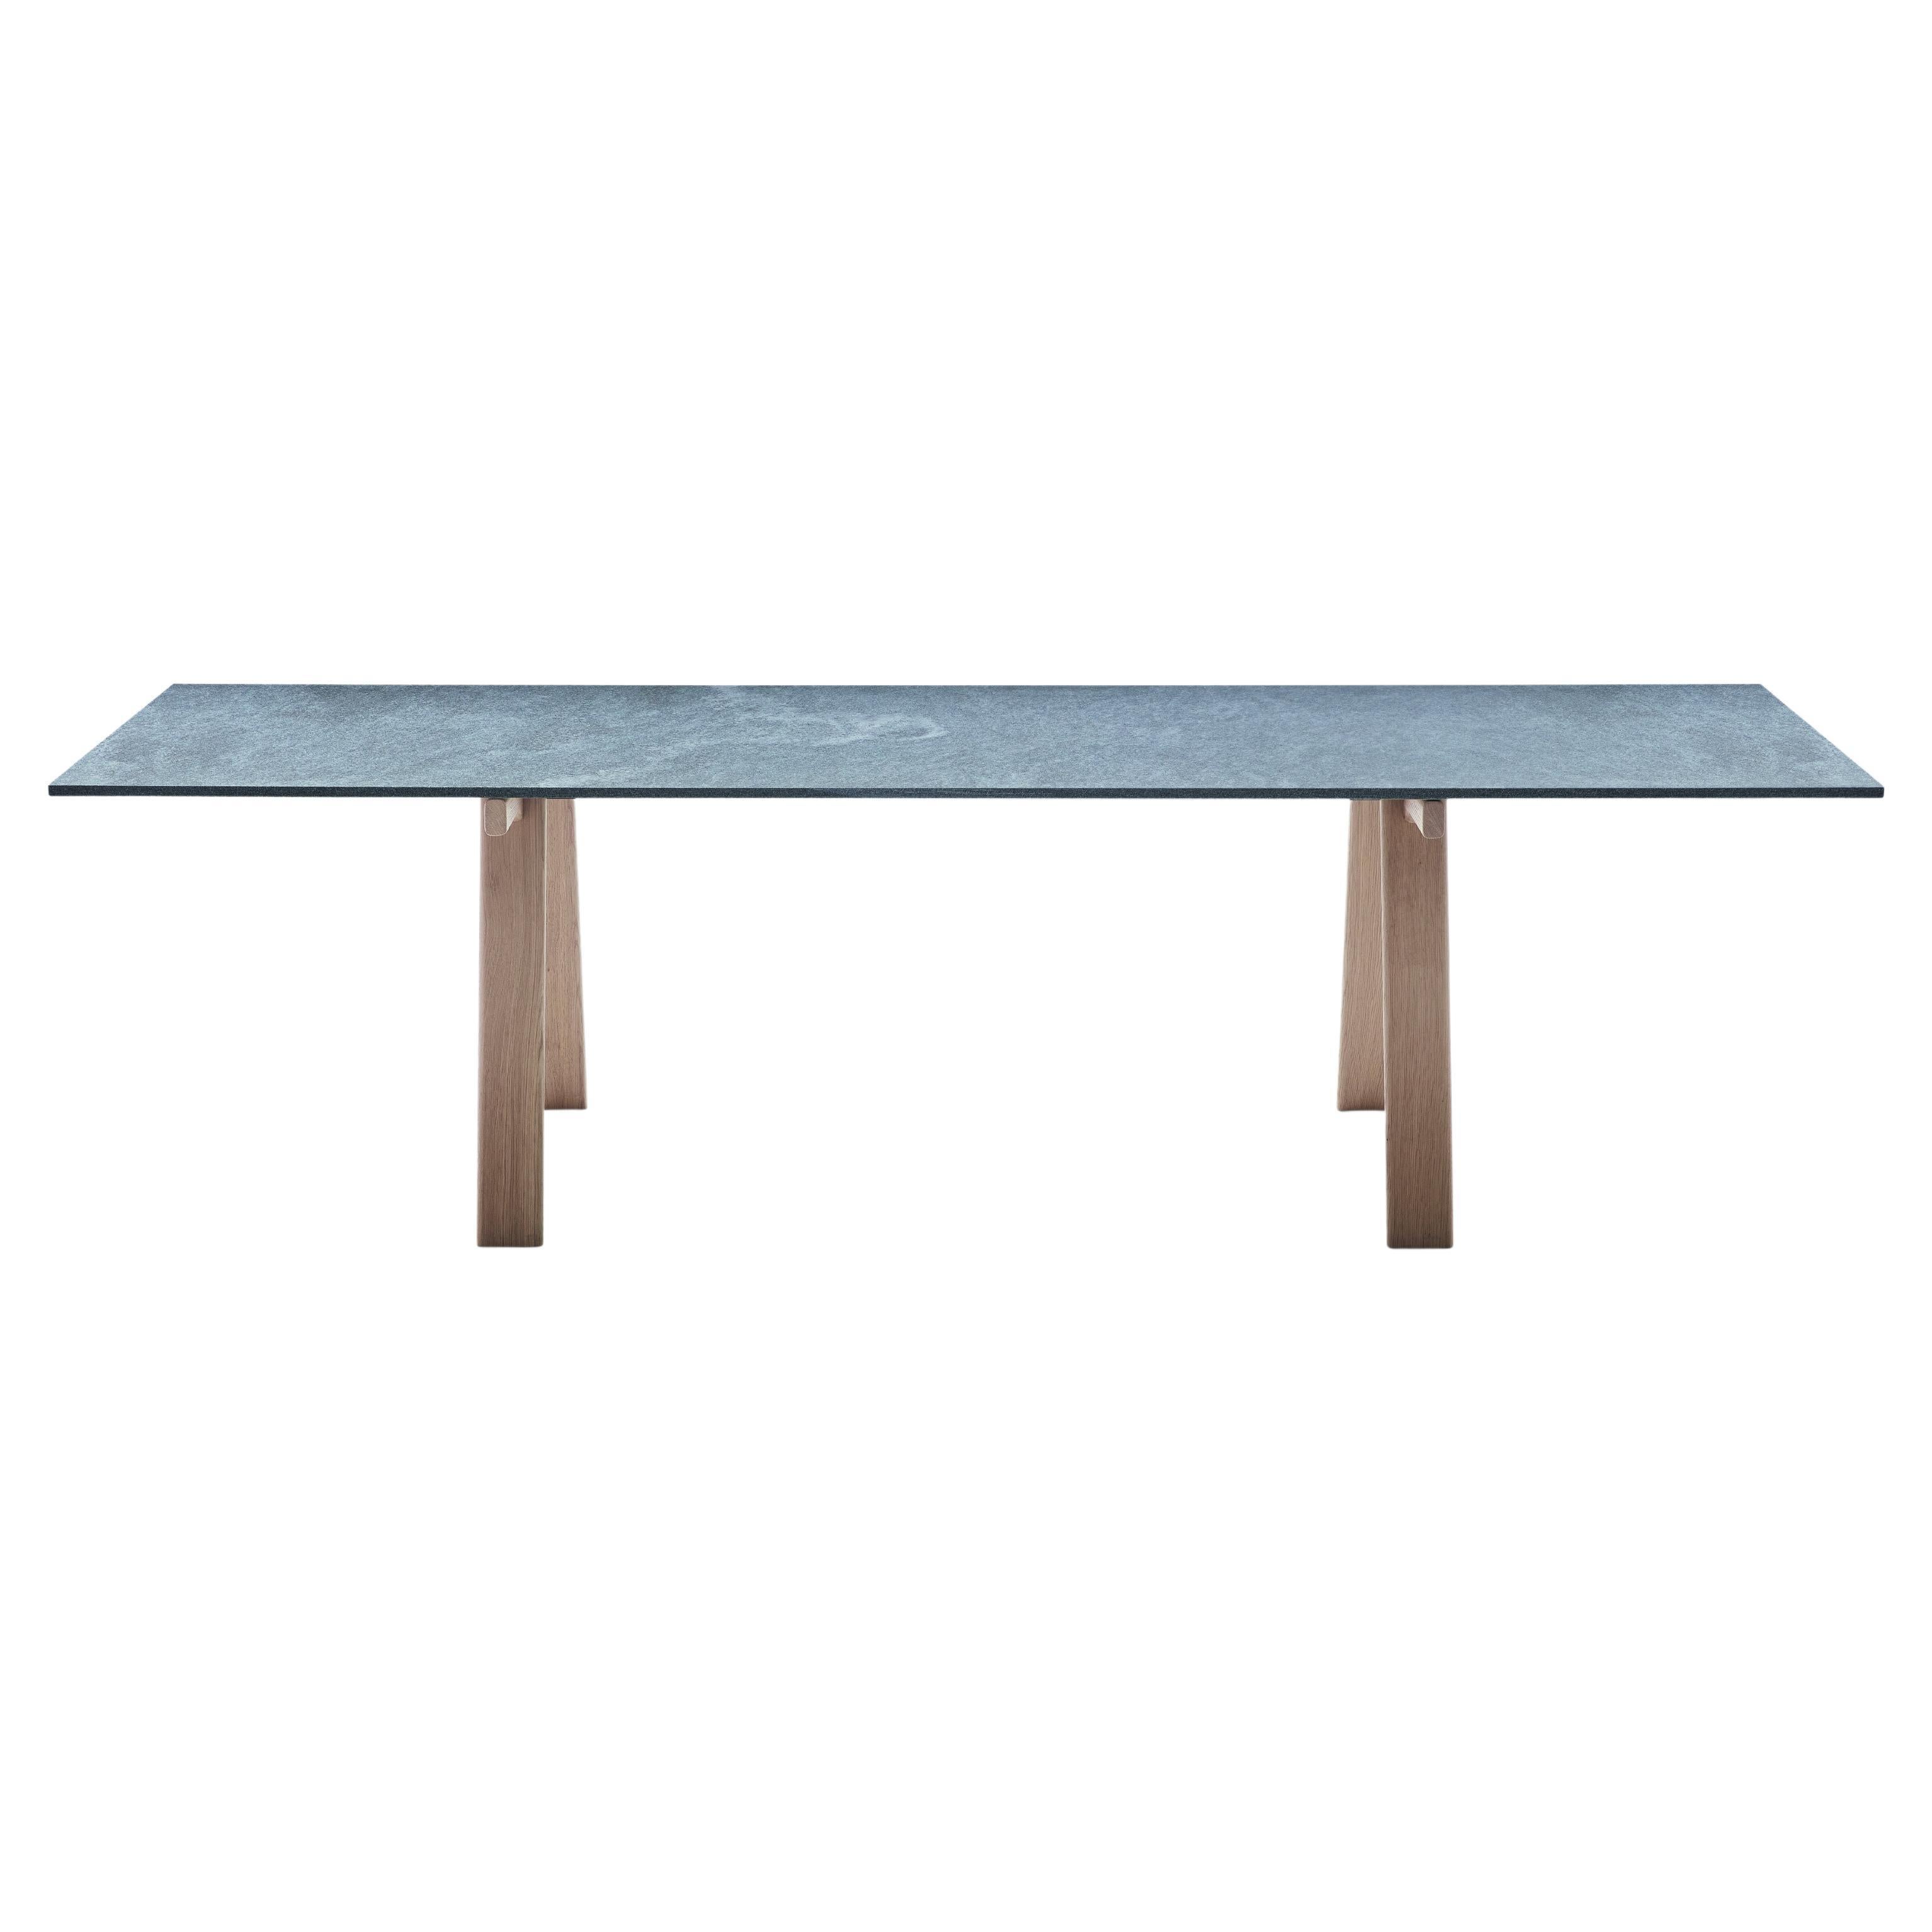 Zanotta Large Ambrosiano Table in Onsernone Stone Top with Natural Oak Frame